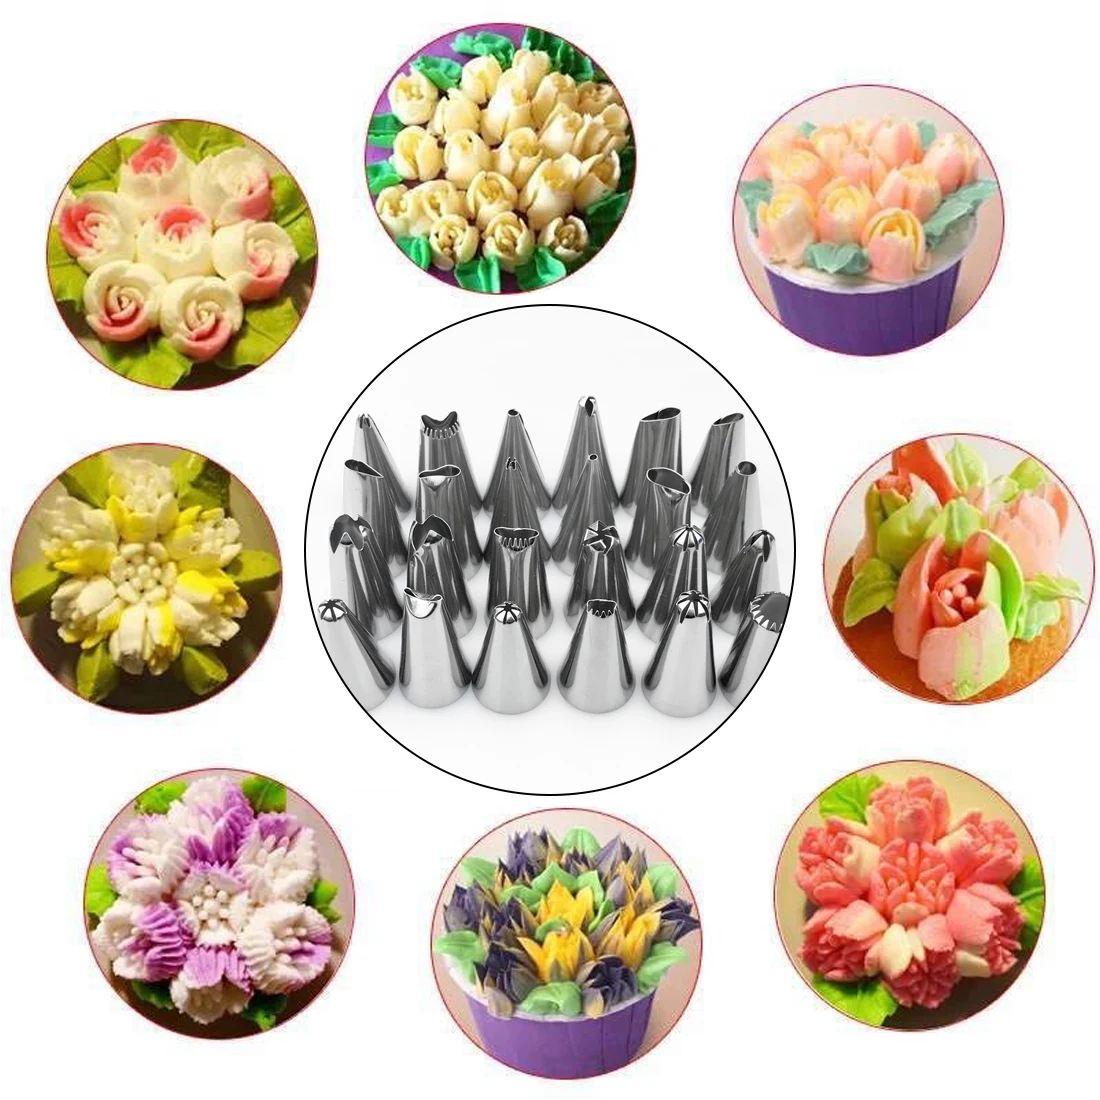 Cake Decorating 24Pcs/set Stainless steel Large Icing Piping Pastry Nozzles Pastry Tips Kitchen Accessories Baking Cake decor